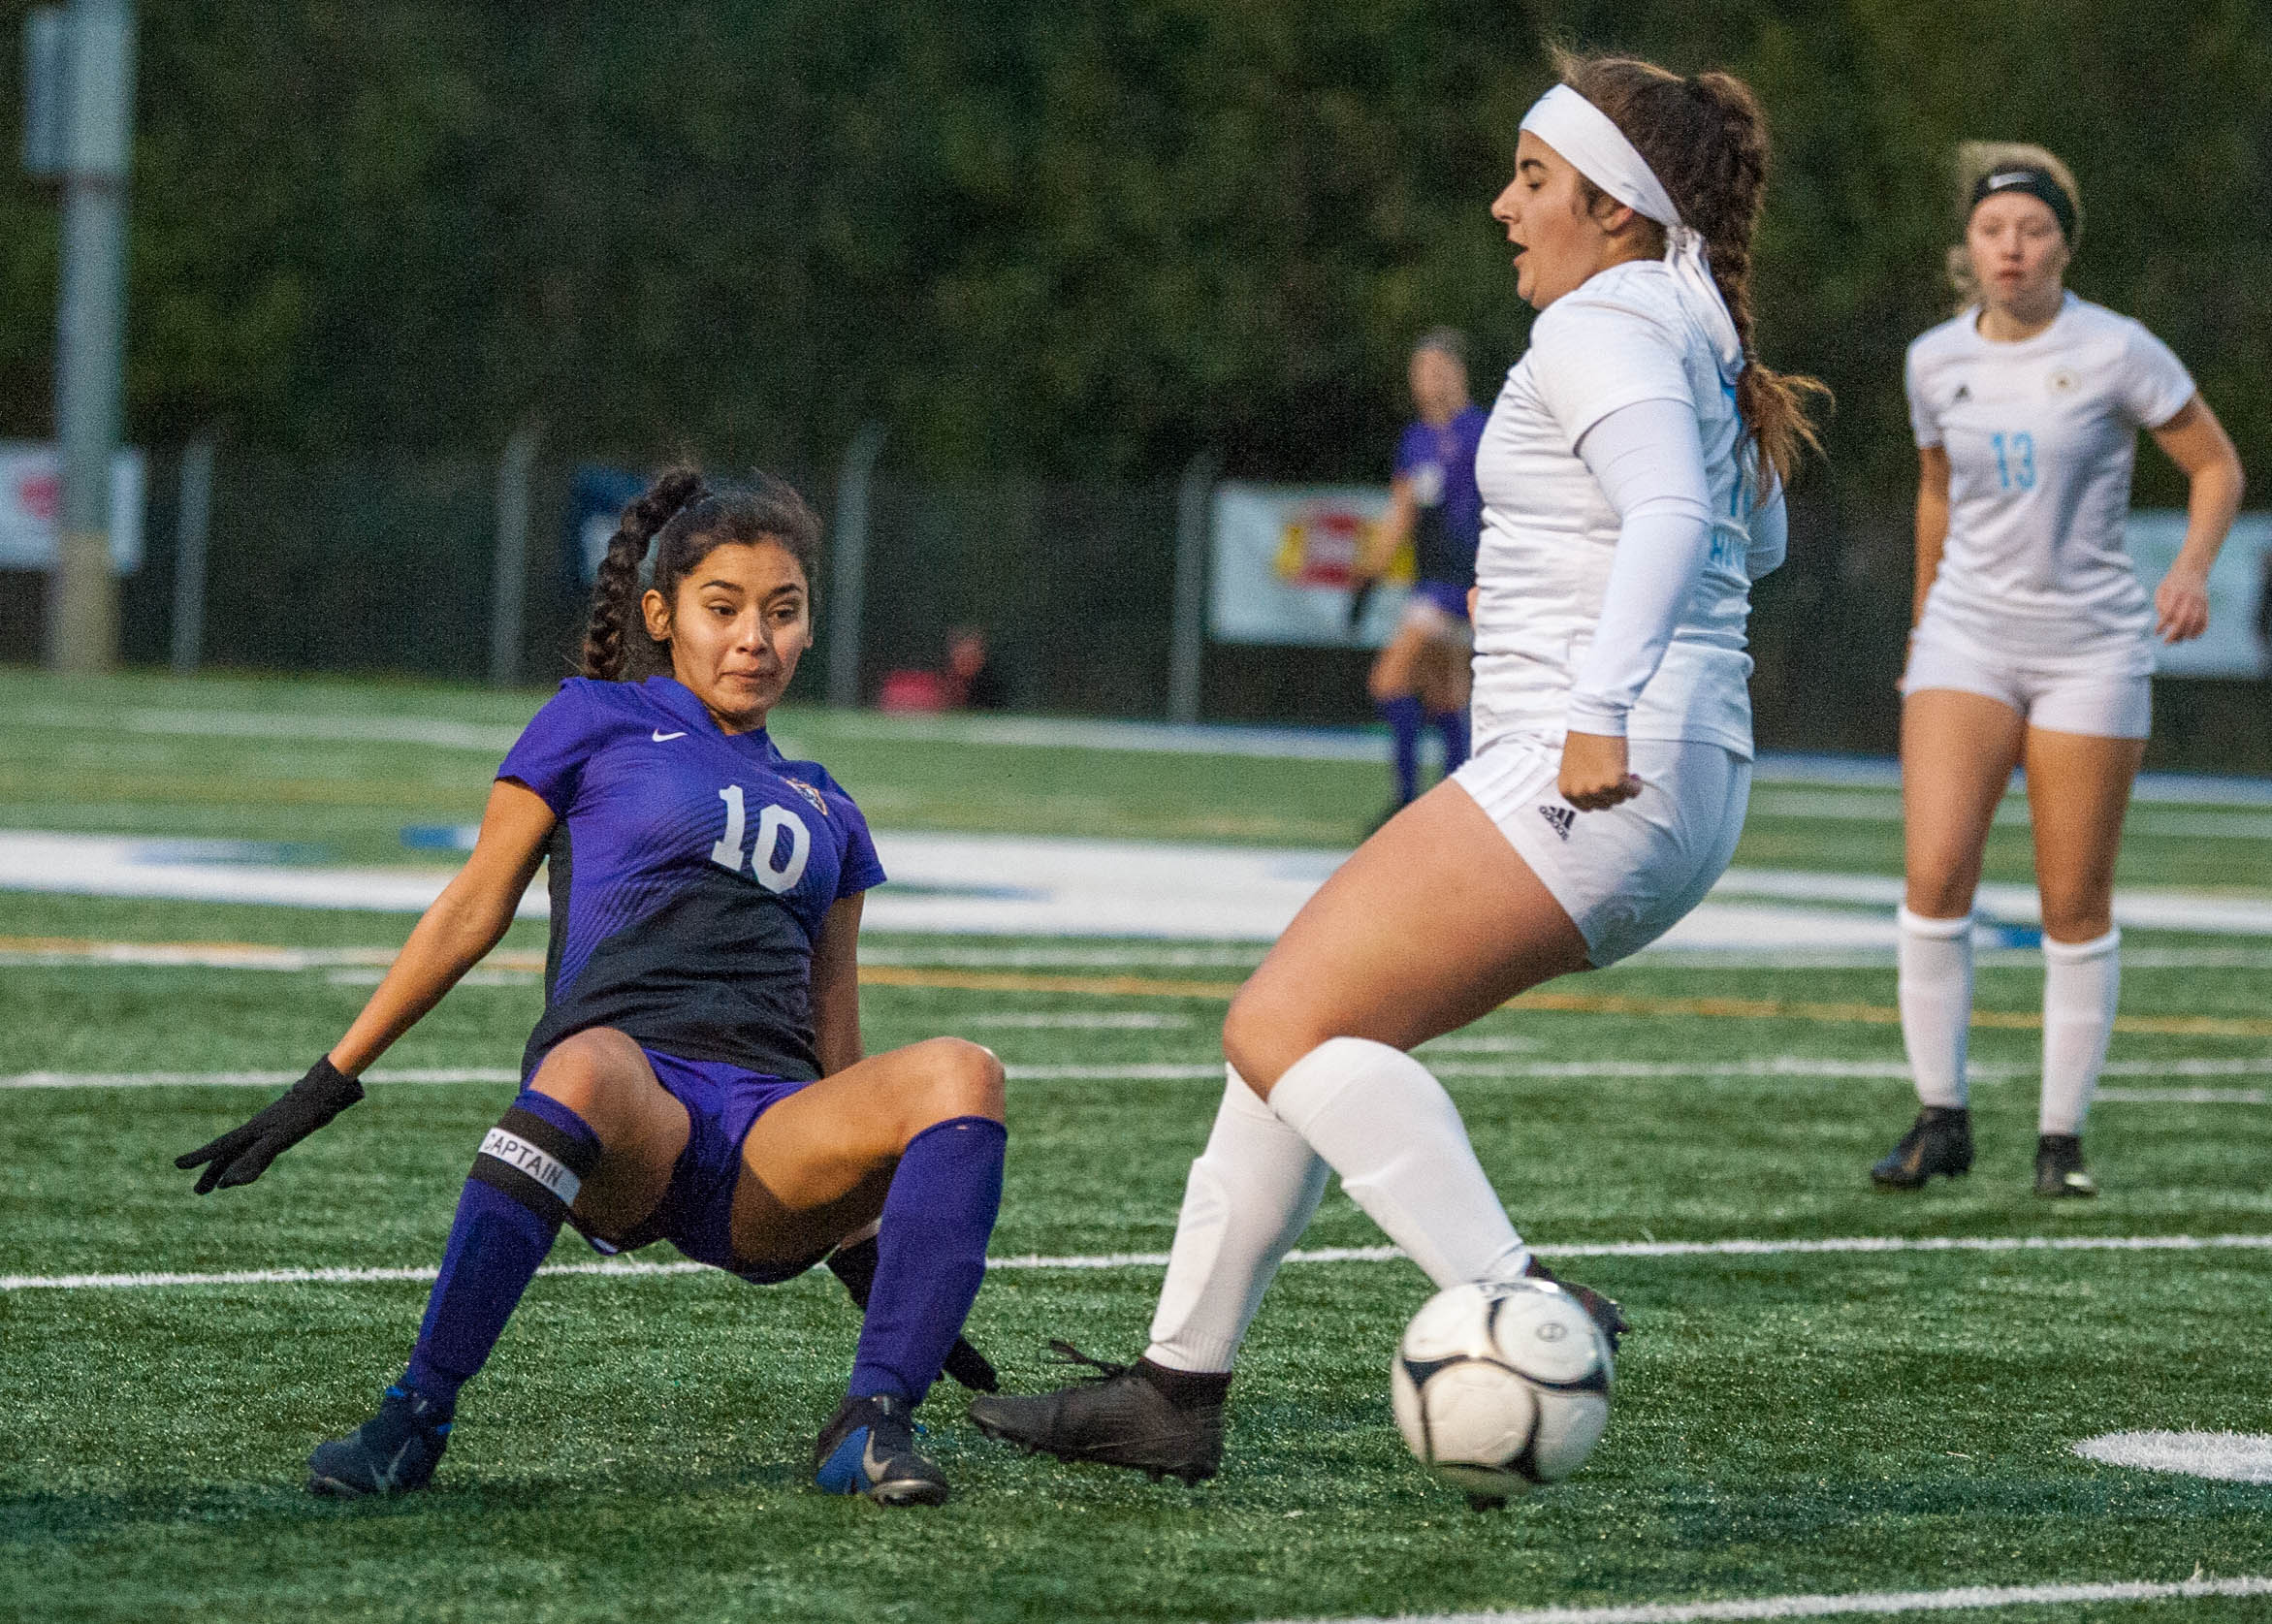 Columbia River's Yaneisy Rodriguez slips while making a pass past Hockinson's Ellie Summerson.